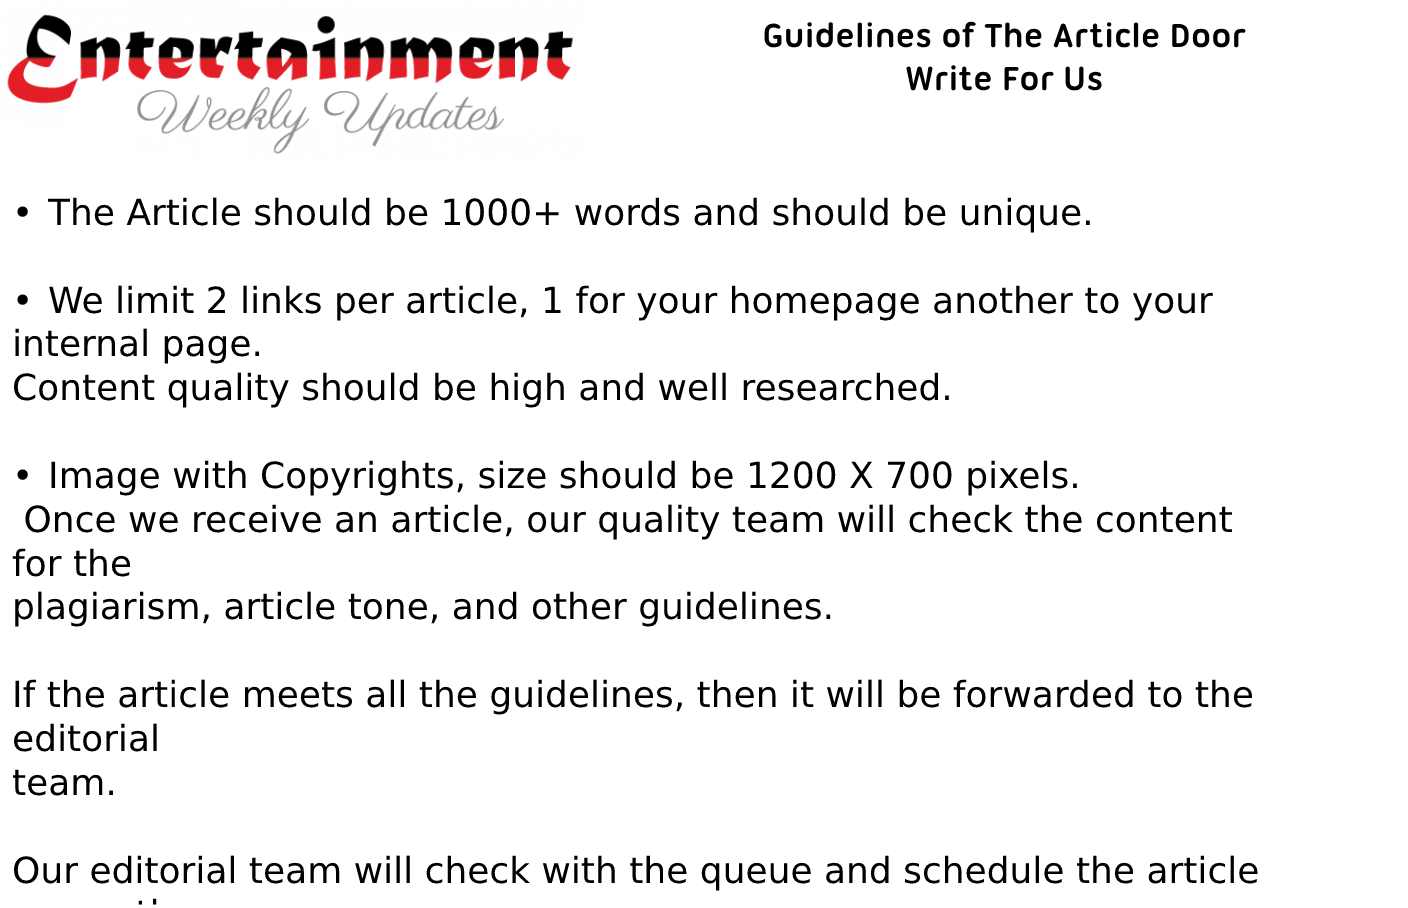 Guidelines of The Article Door Write For Us